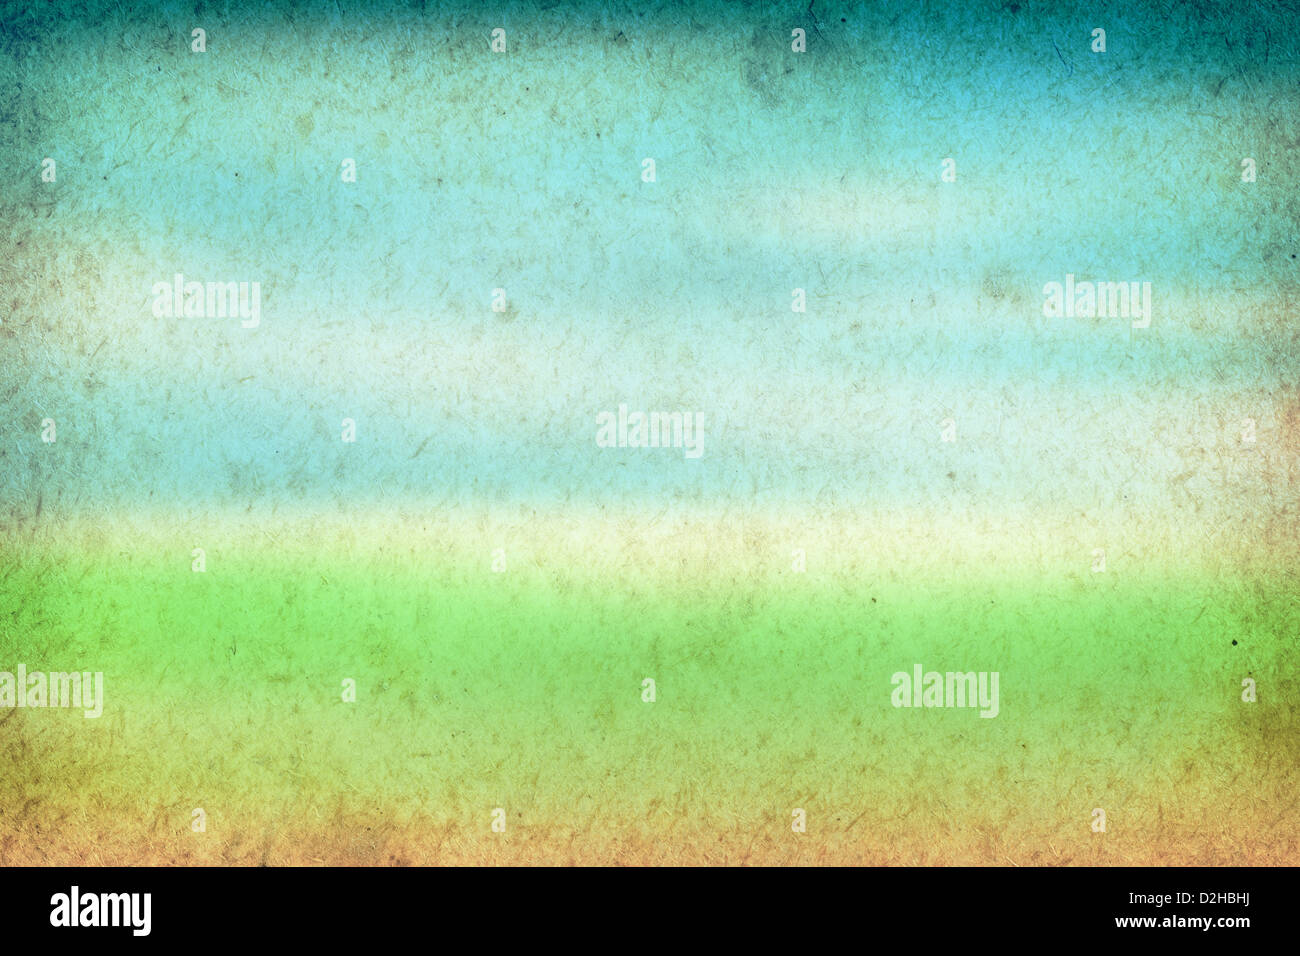 Spring background, green and blue vintage paper texture Stock Photo